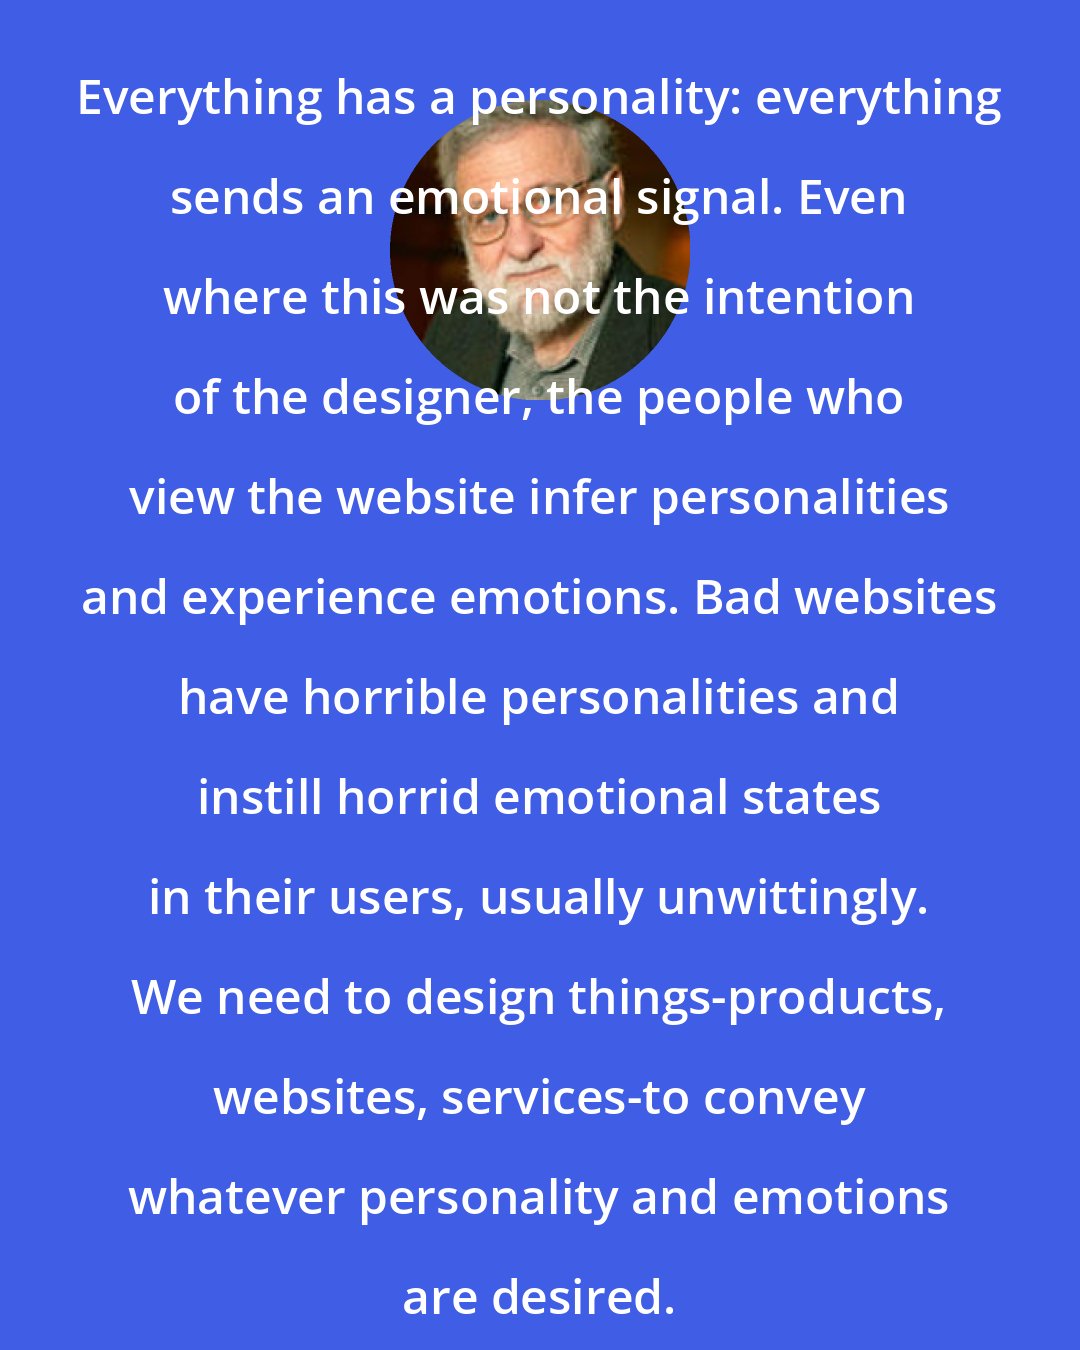 Donald A. Norman: Everything has a personality: everything sends an emotional signal. Even where this was not the intention of the designer, the people who view the website infer personalities and experience emotions. Bad websites have horrible personalities and instill horrid emotional states in their users, usually unwittingly. We need to design things-products, websites, services-to convey whatever personality and emotions are desired.